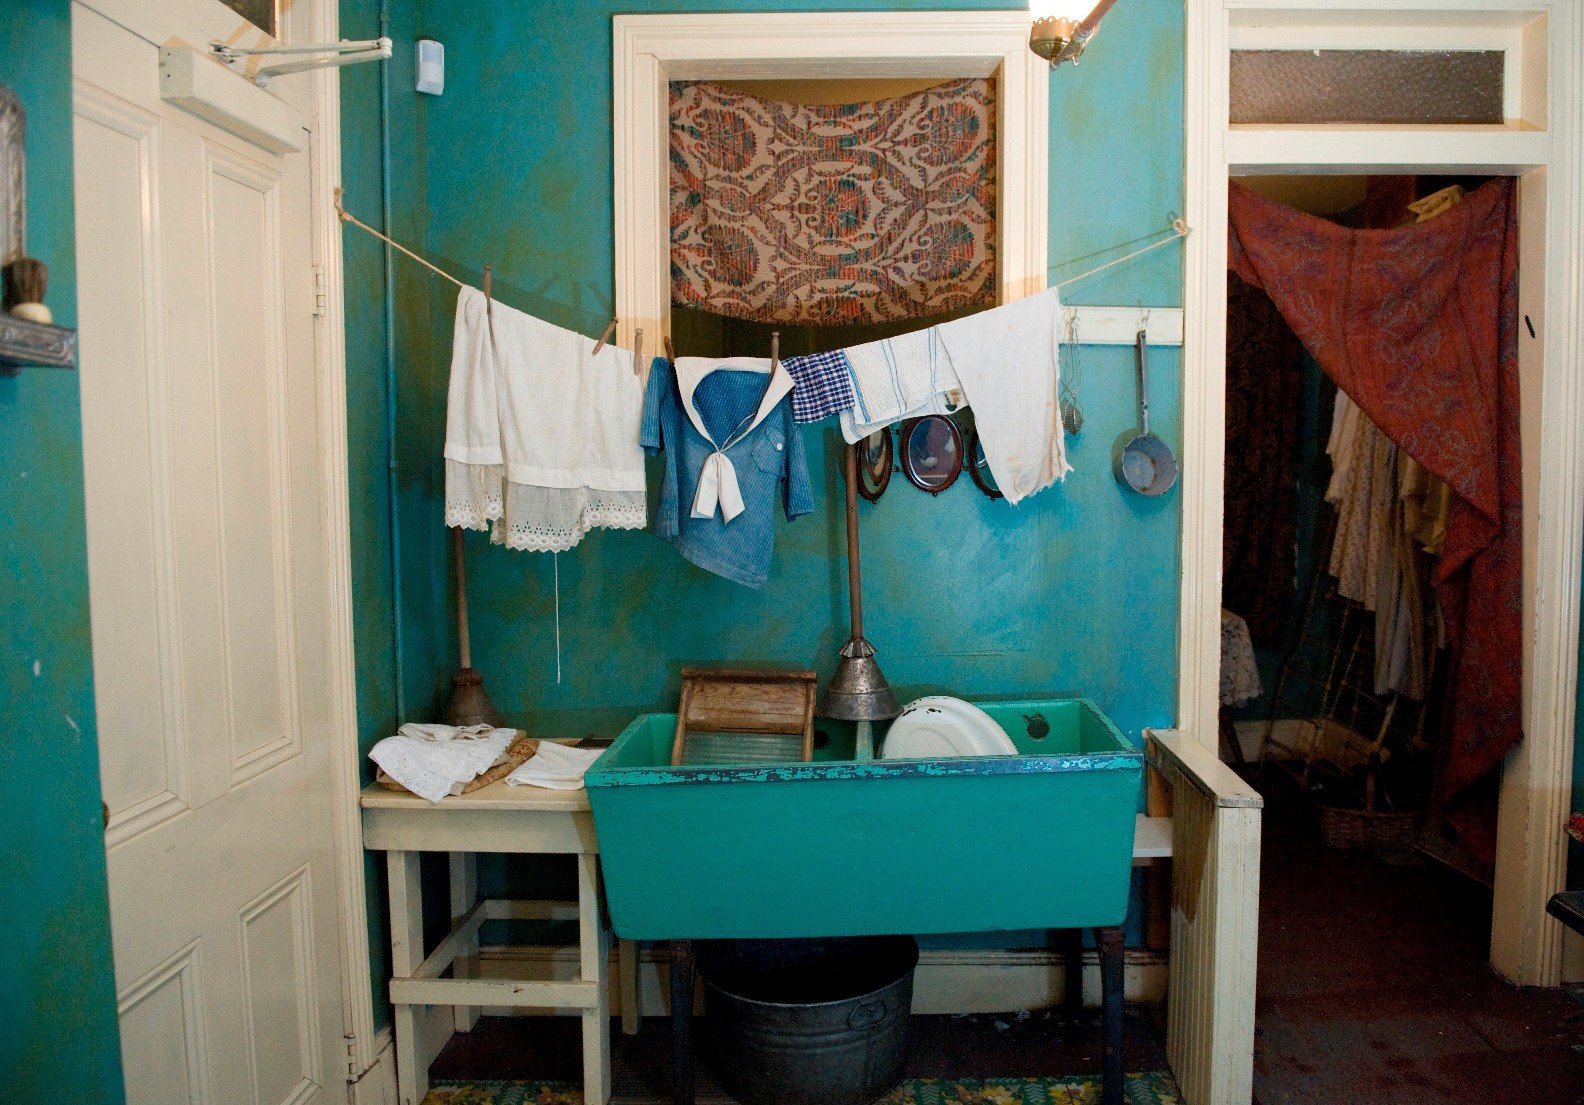 Color photo of a part of the Confino family kitchen with bright blue walls, a blue sink with a washboard inside, and a line of laundry hanging above